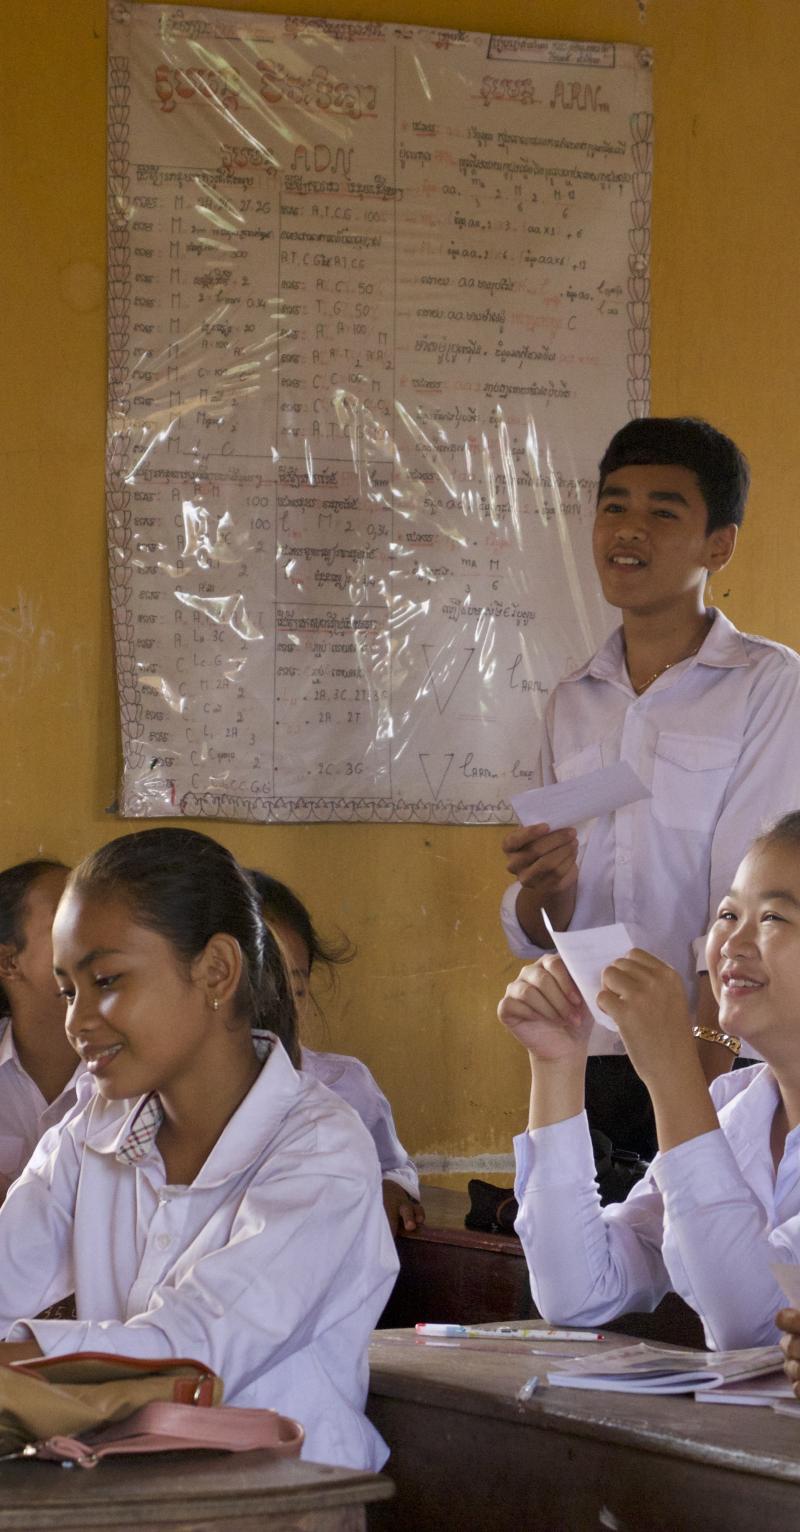 Students all wearing collared, long-sleeved shirts are sitting down at their desks in a classroom with large, open windows. They are smiling and reading from small paper cards.